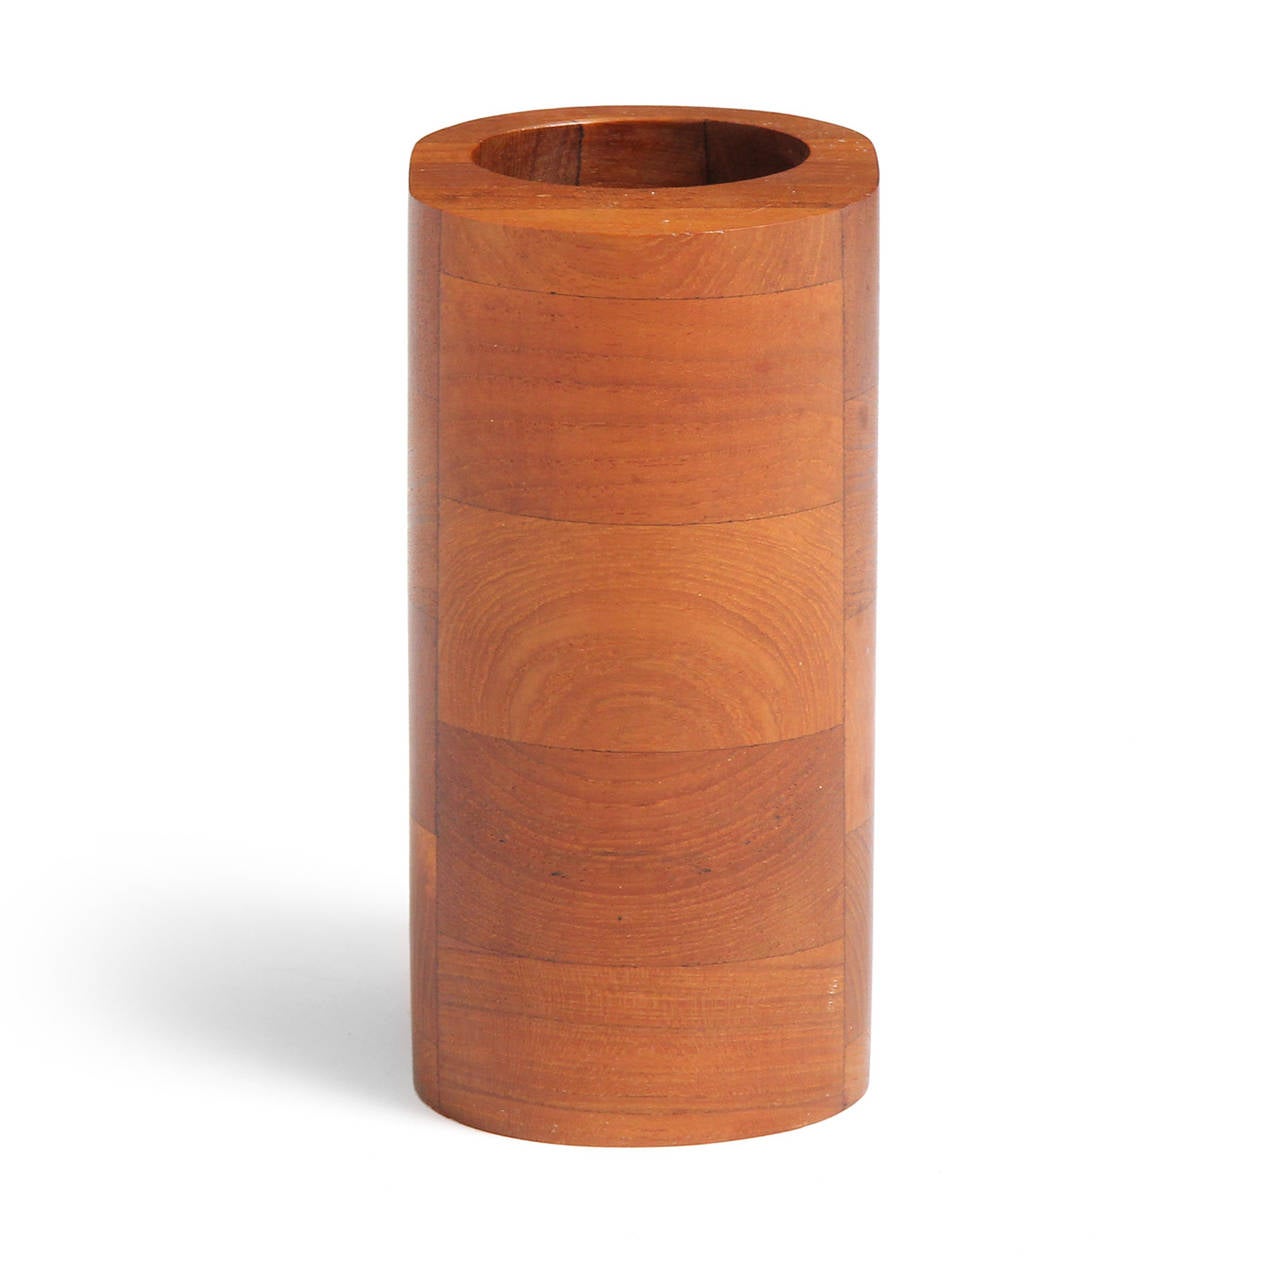 An unusual and sculptural oval vase with a circular opening, masterfully crafted of stacked solid teak.